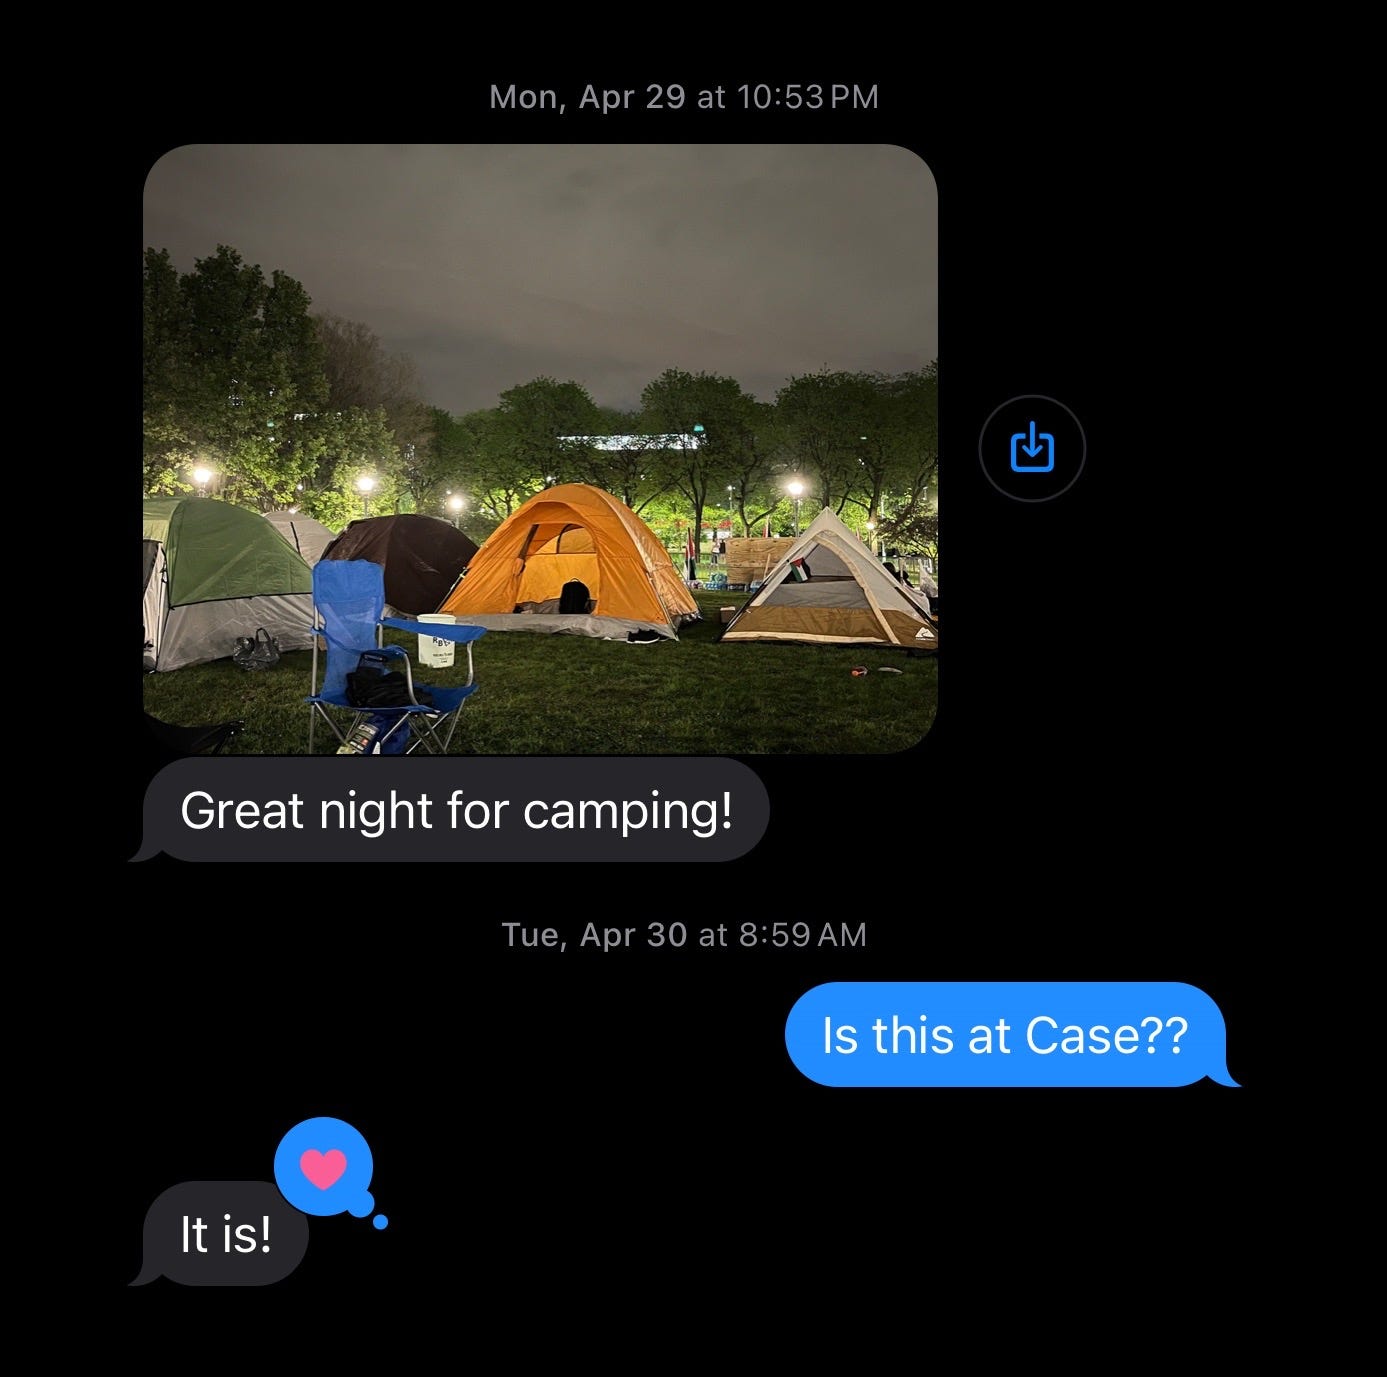 A text message from S with a photo of the encampment and the message “Great night for camping!”